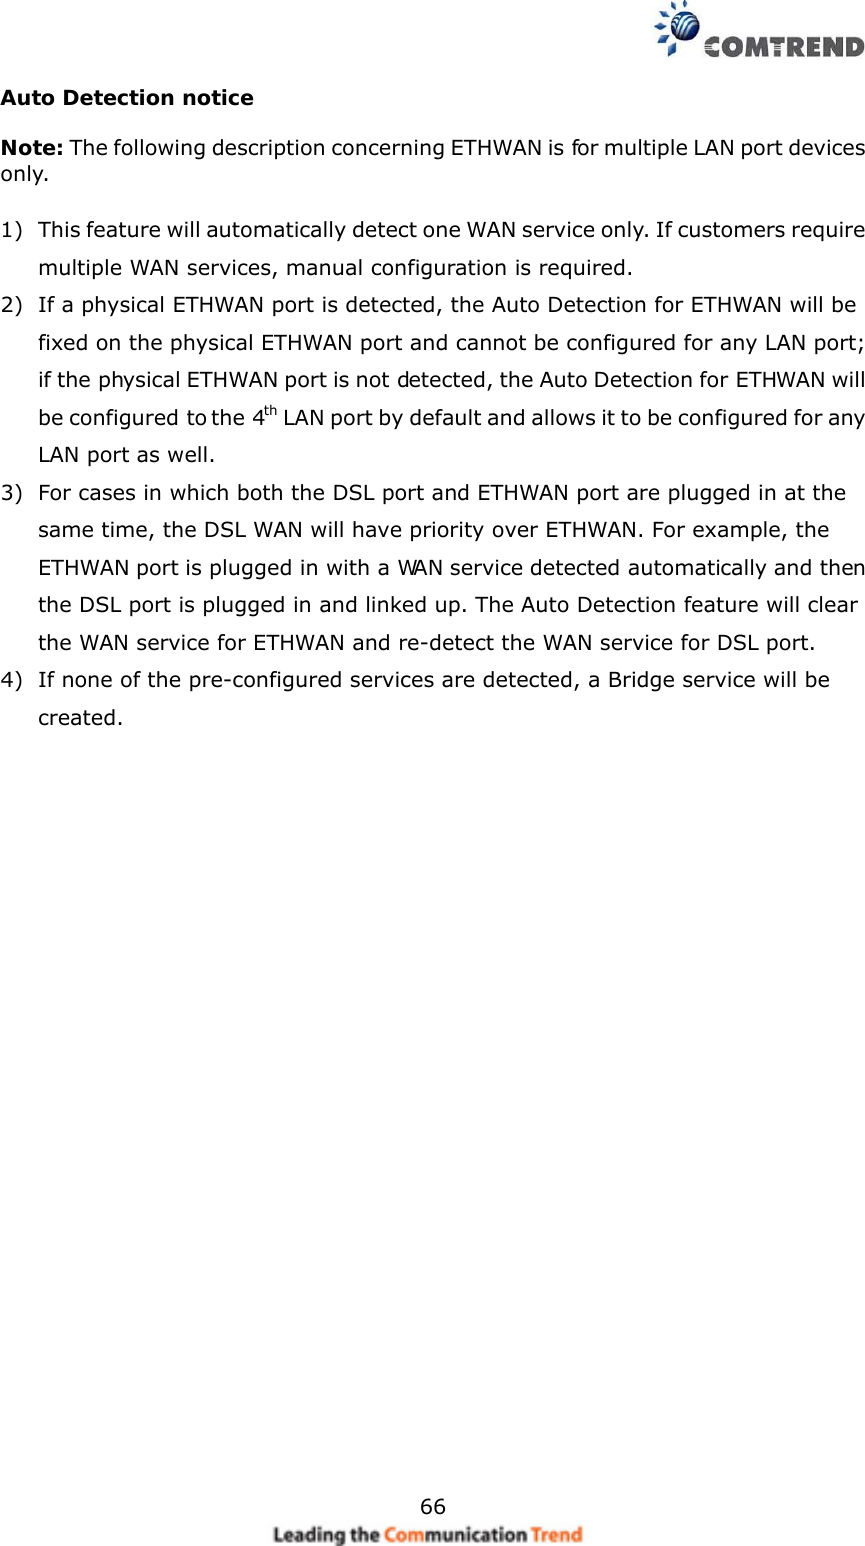    66 Auto Detection notice  Note: The following description concerning ETHWAN is for multiple LAN port devices only.  1) This feature will automatically detect one WAN service only. If customers require multiple WAN services, manual configuration is required. 2) If a physical ETHWAN port is detected, the Auto Detection for ETHWAN will be fixed on the physical ETHWAN port and cannot be configured for any LAN port; if the physical ETHWAN port is not detected, the Auto Detection for ETHWAN will be configured to the 4th LAN port by default and allows it to be configured for any LAN port as well. 3) For cases in which both the DSL port and ETHWAN port are plugged in at the same time, the DSL WAN will have priority over ETHWAN. For example, the ETHWAN port is plugged in with a WAN service detected automatically and then the DSL port is plugged in and linked up. The Auto Detection feature will clear the WAN service for ETHWAN and re-detect the WAN service for DSL port. 4) If none of the pre-configured services are detected, a Bridge service will be created.     